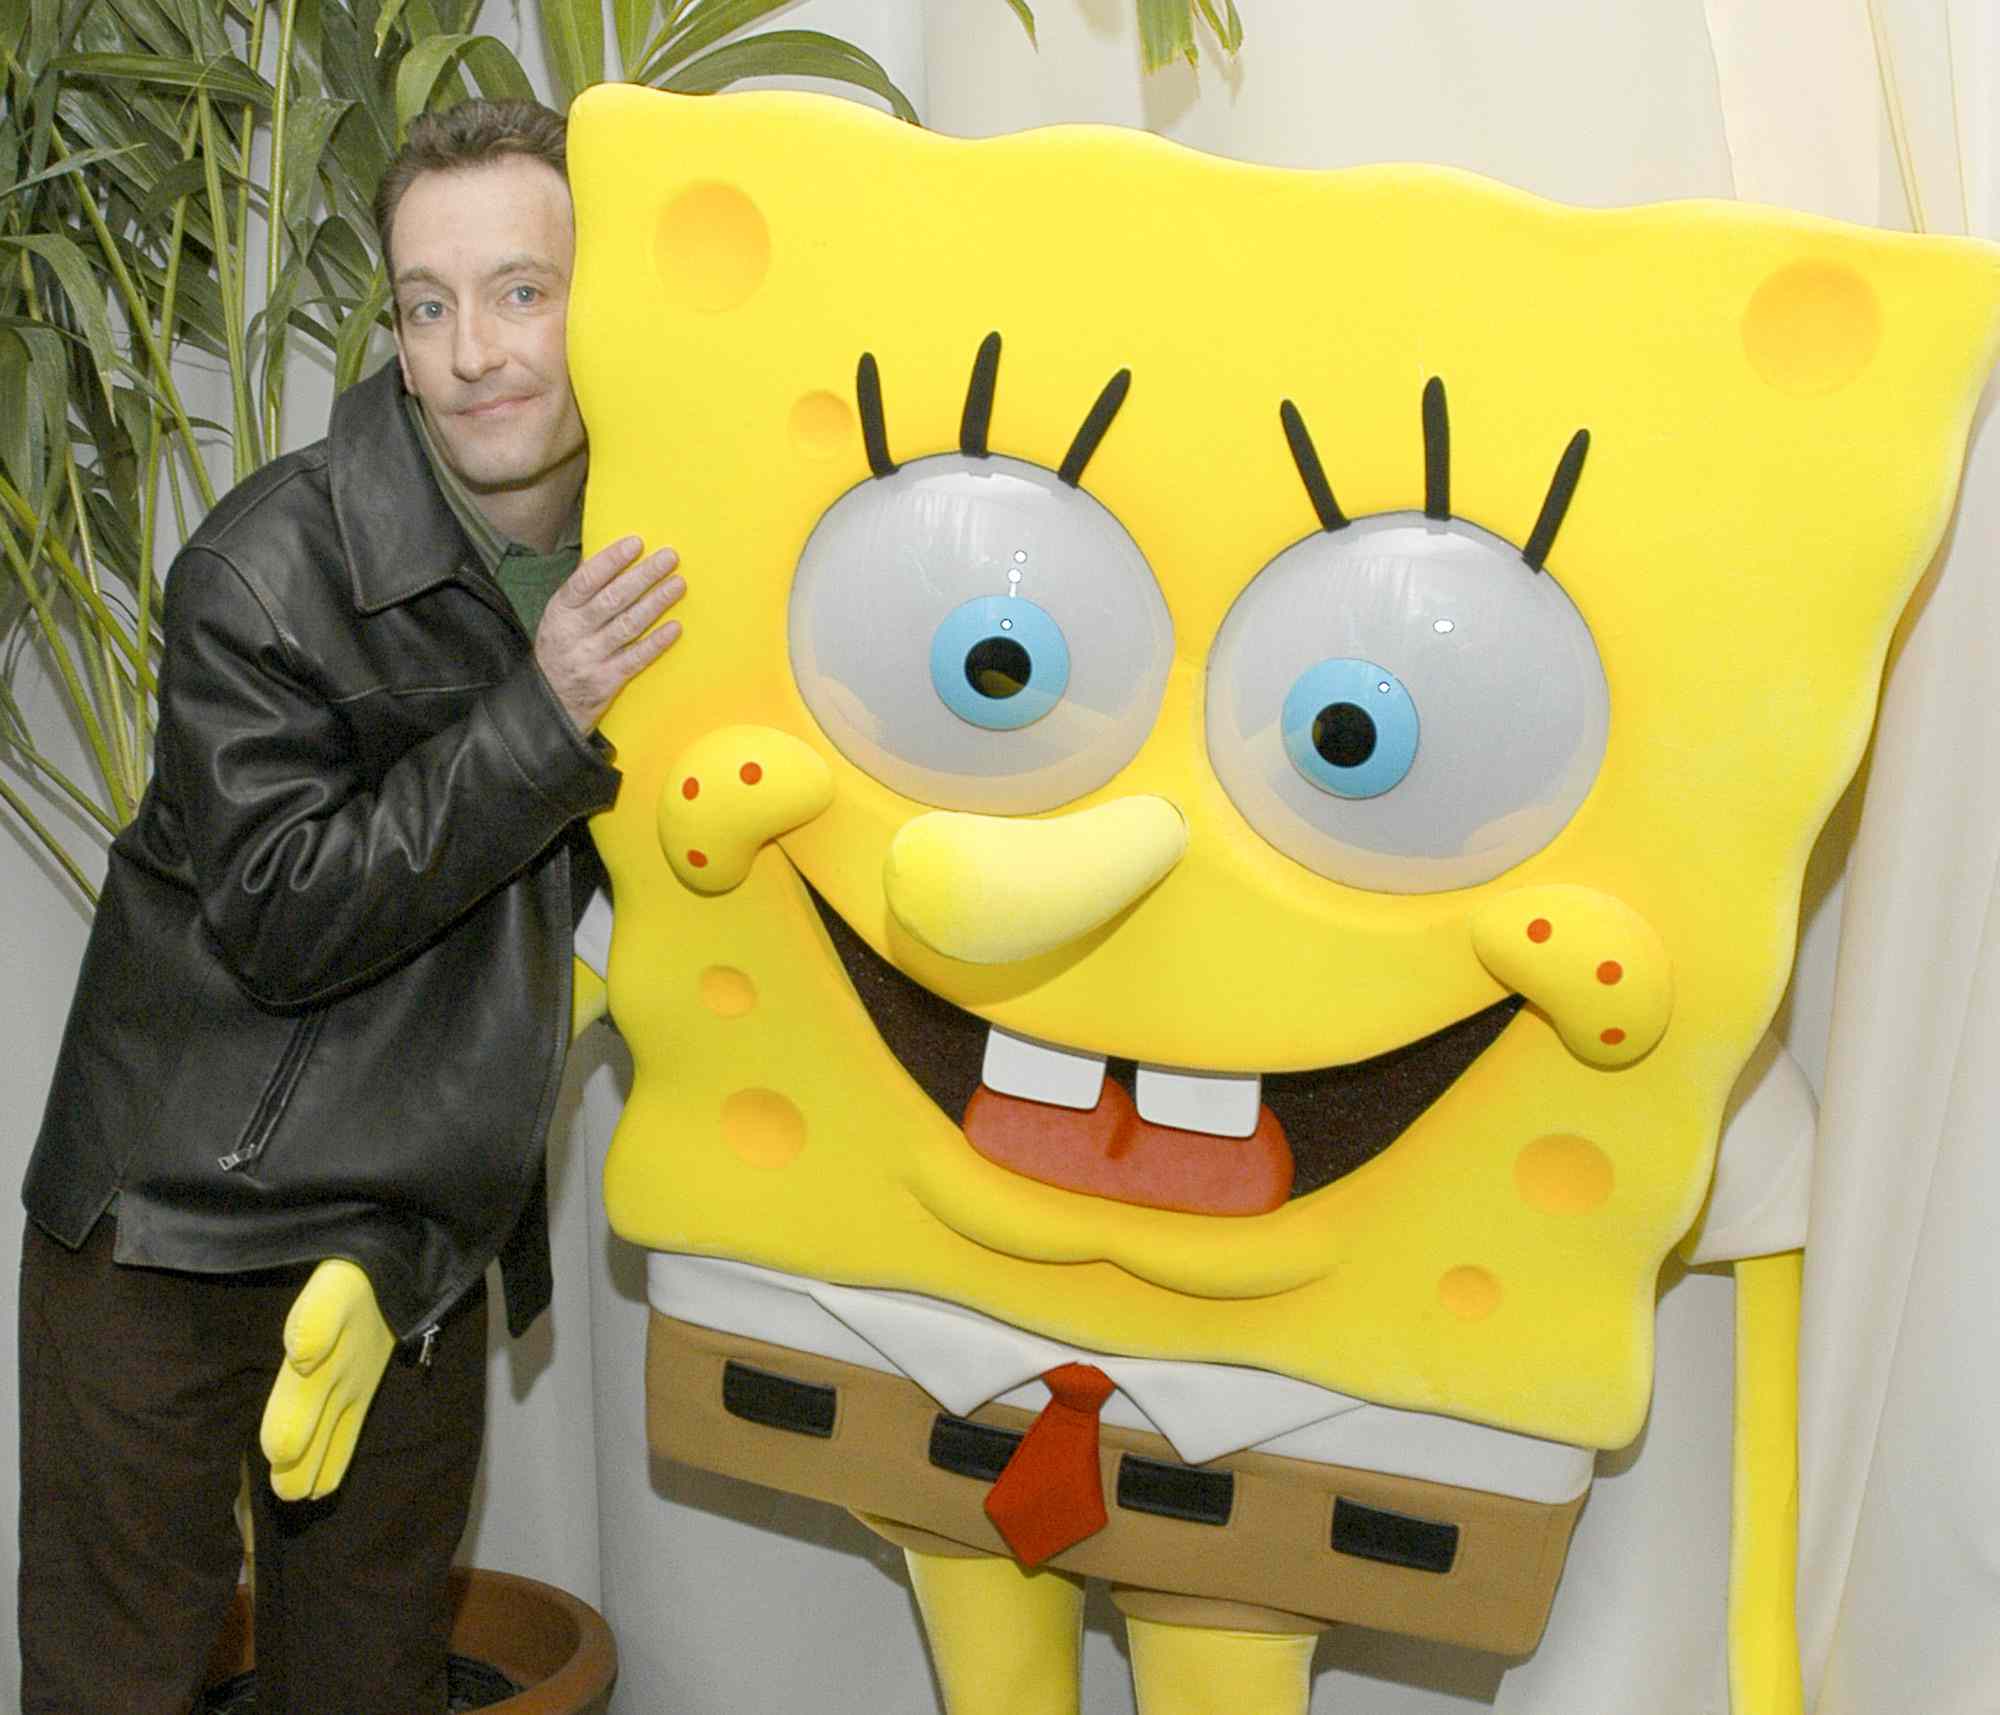 Tom Kenny, the voice of "SpongeBob SquarePants" during "The SpongeBob SquarePants Movie" New York City Screening to Benefit the Princess Grace Awards at Loews Cineplex Lincoln Square Theater in New York City, New York, United States